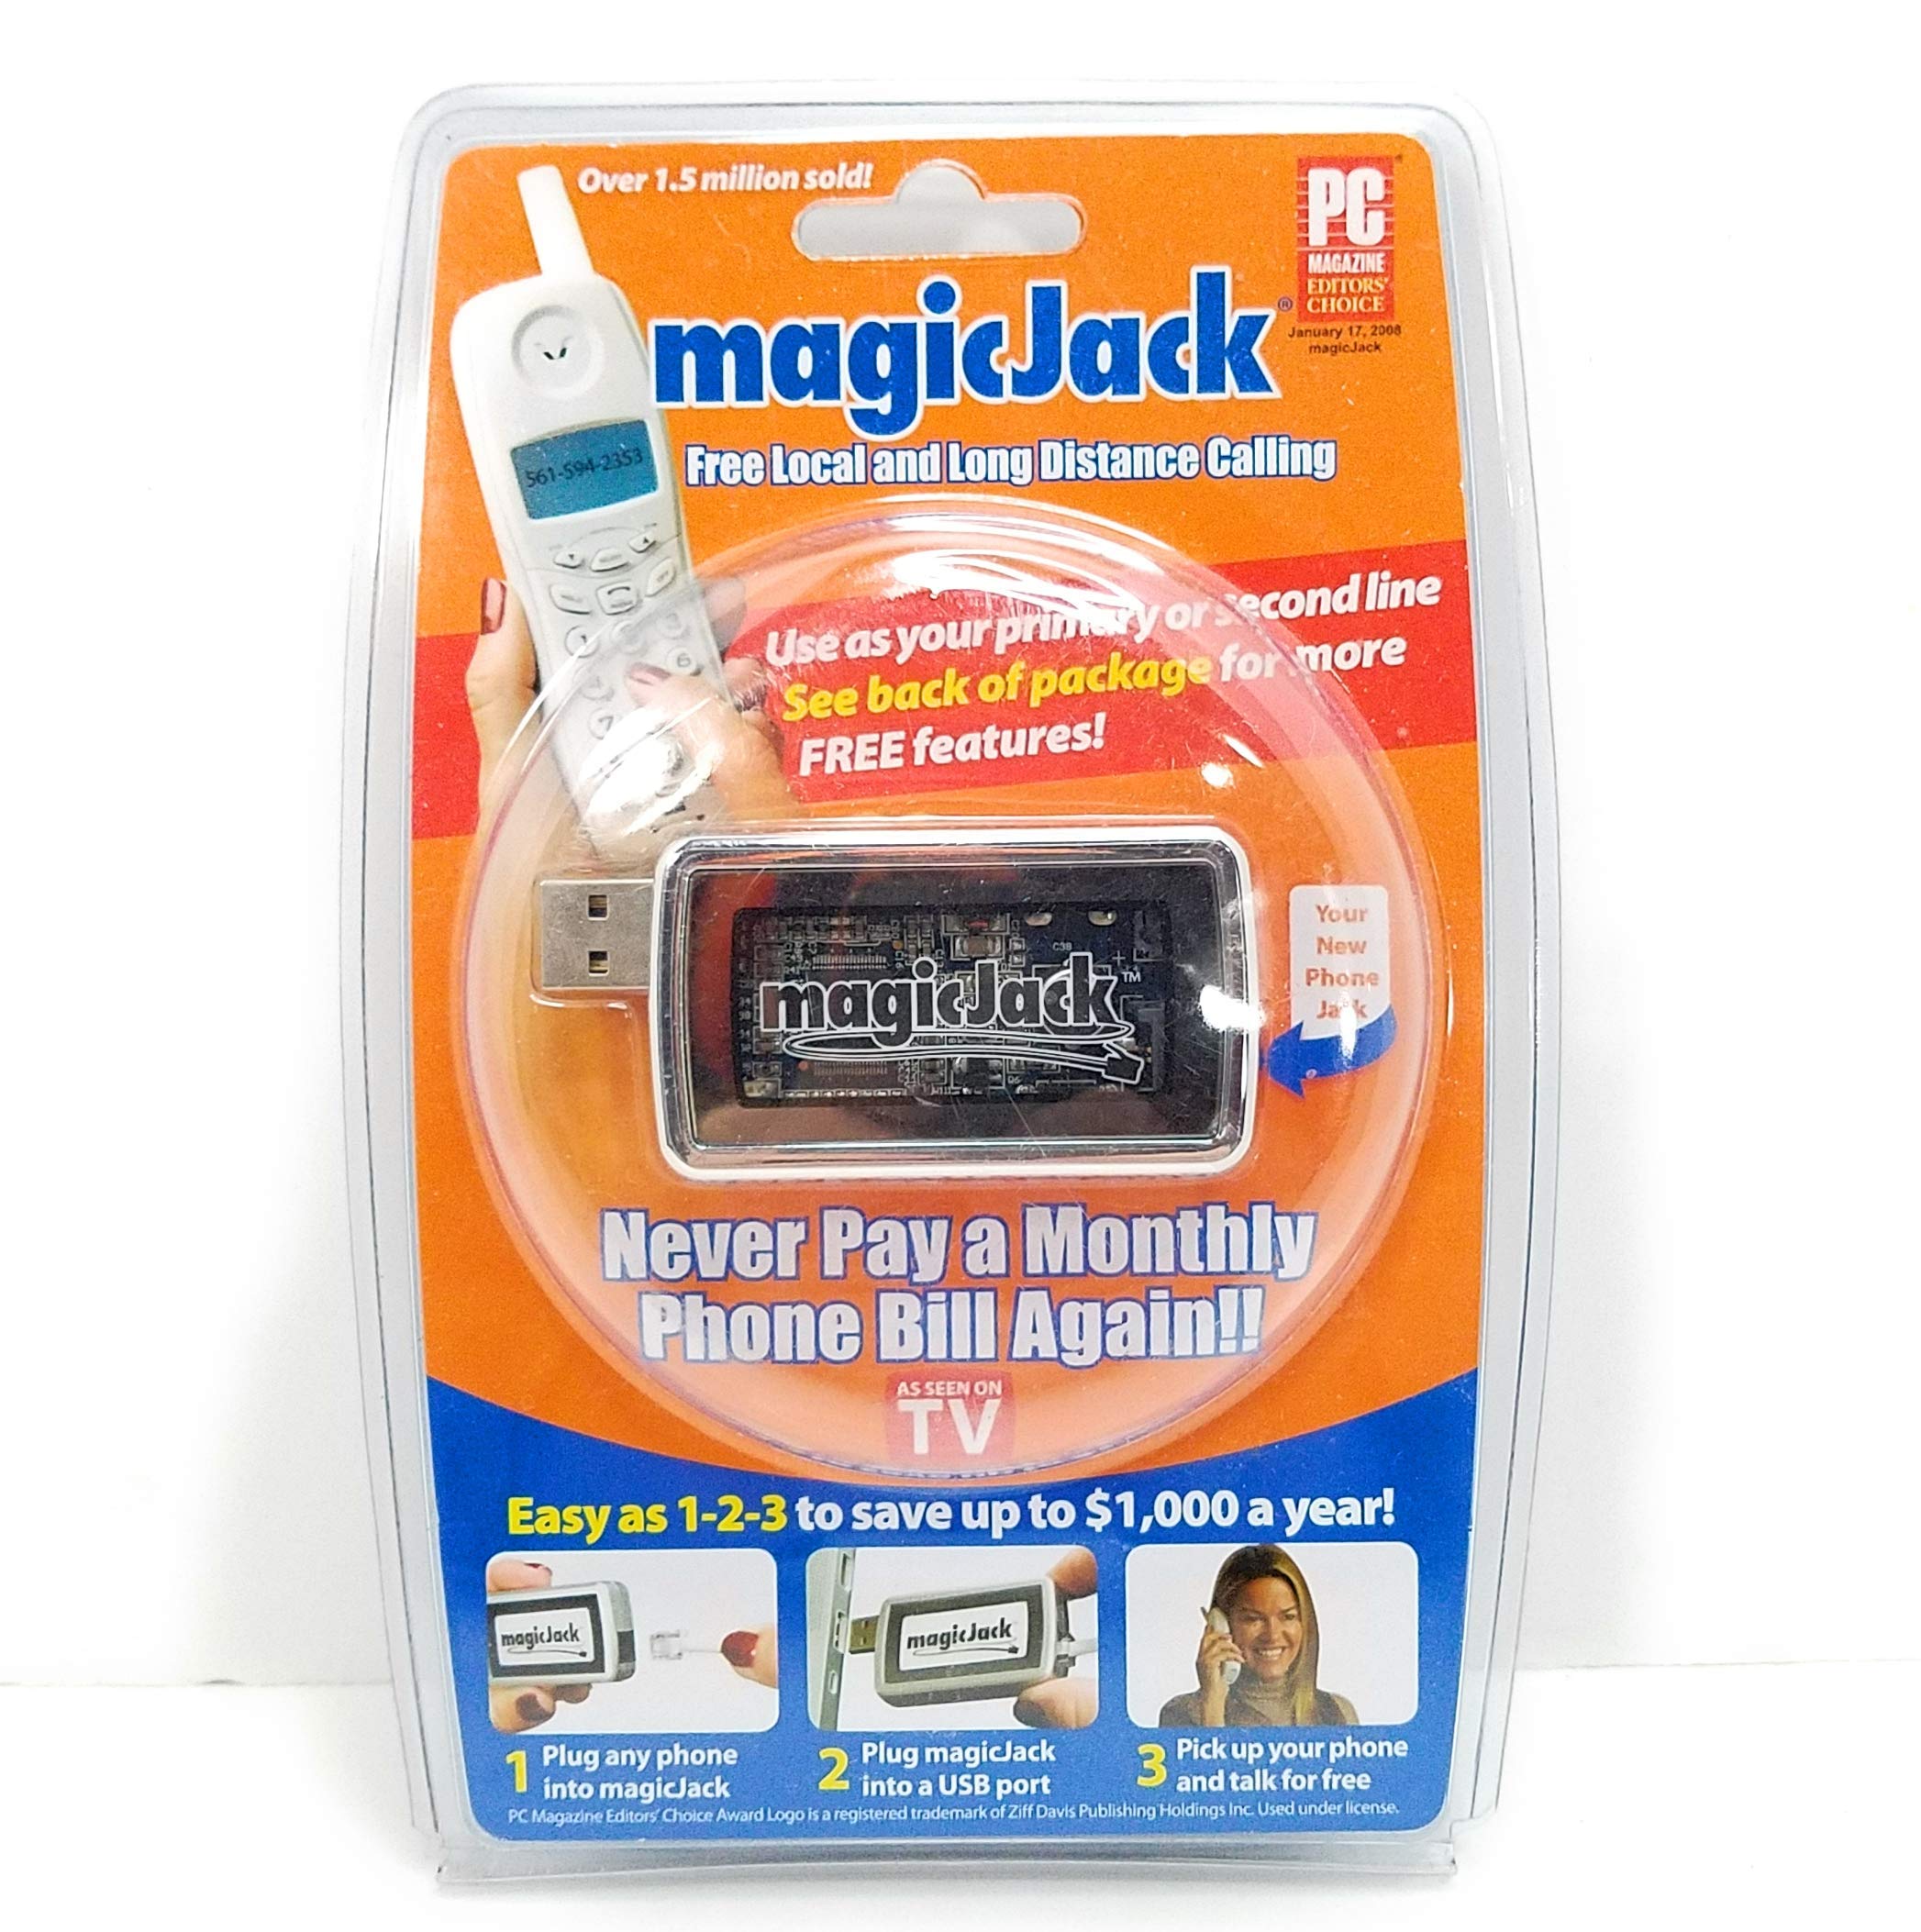 Unplug the MagicJack device from the power source
Wait for at least 10 seconds